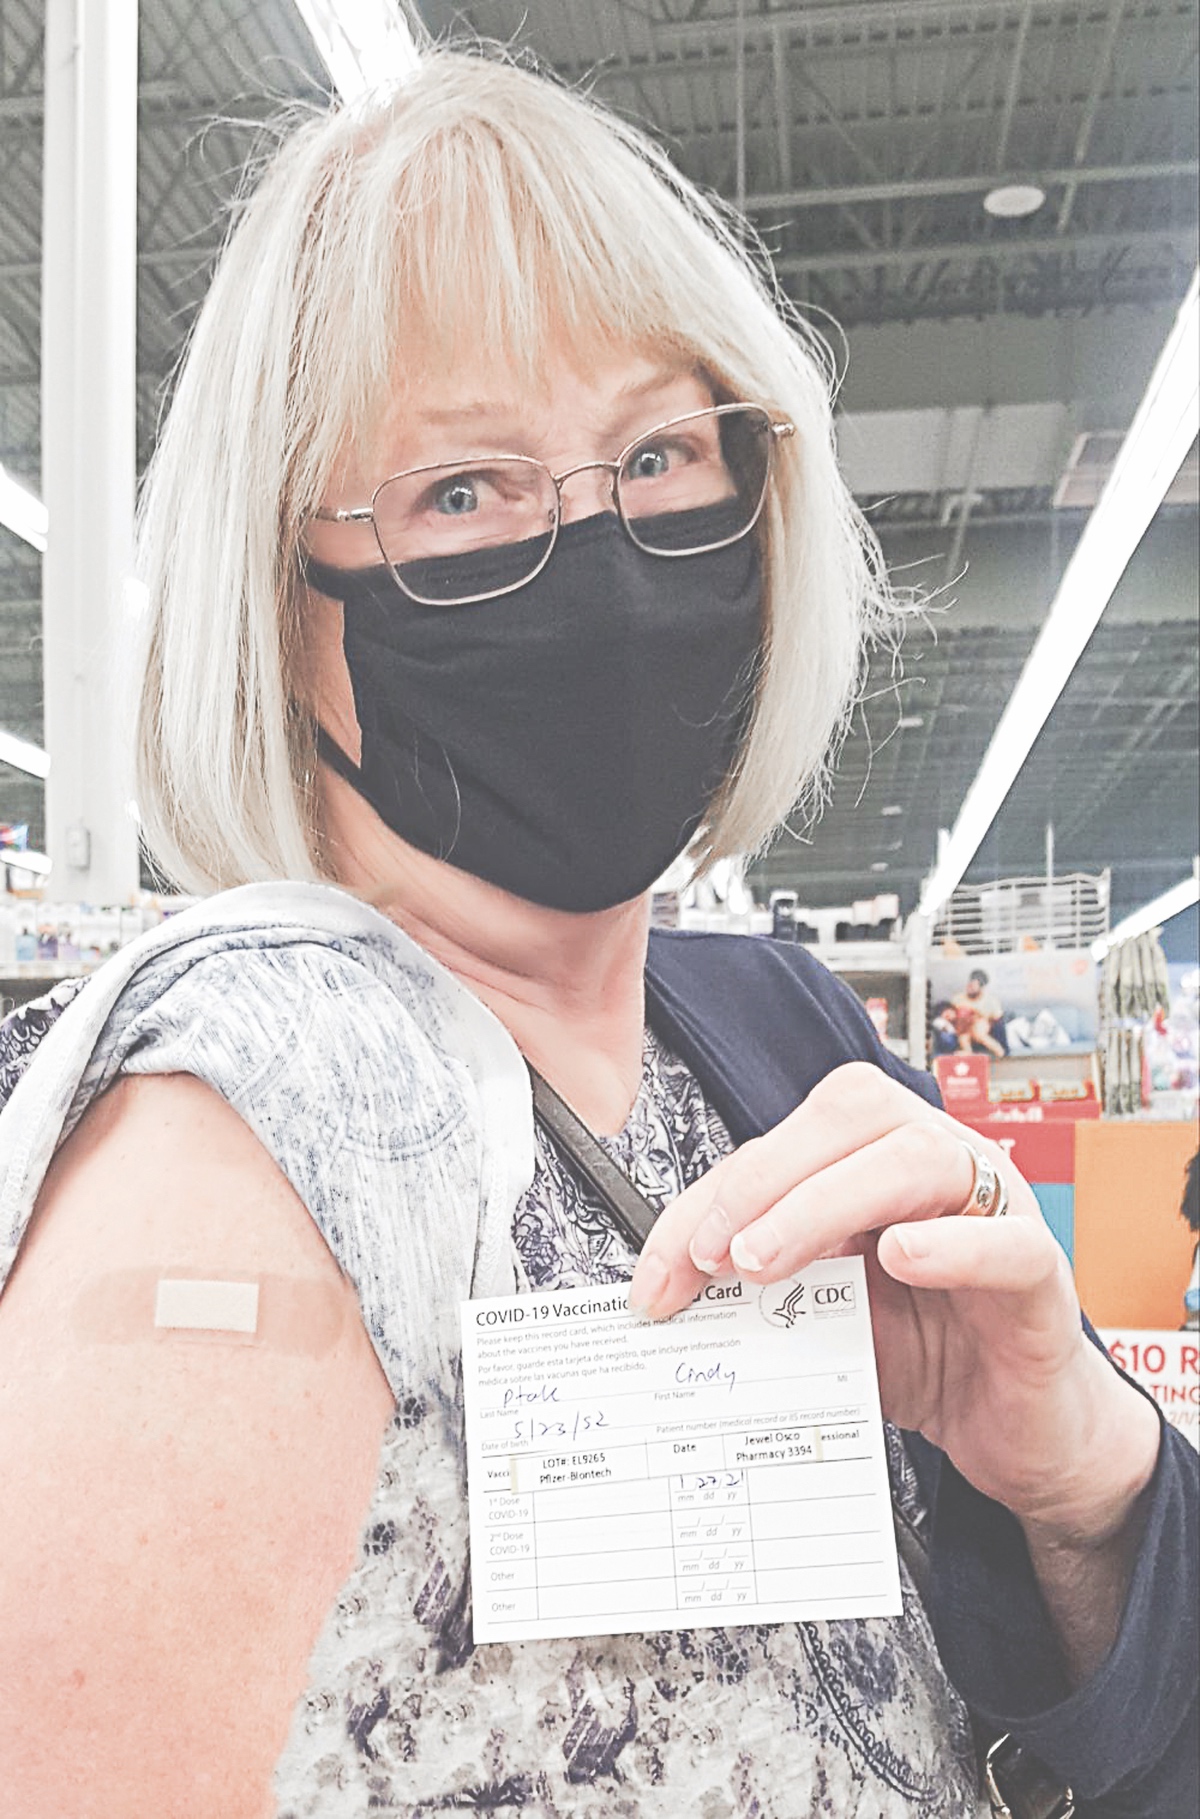 Sporting the bandaid from her shot, Sun City resident Cindy Ptak shows her vaccination card.